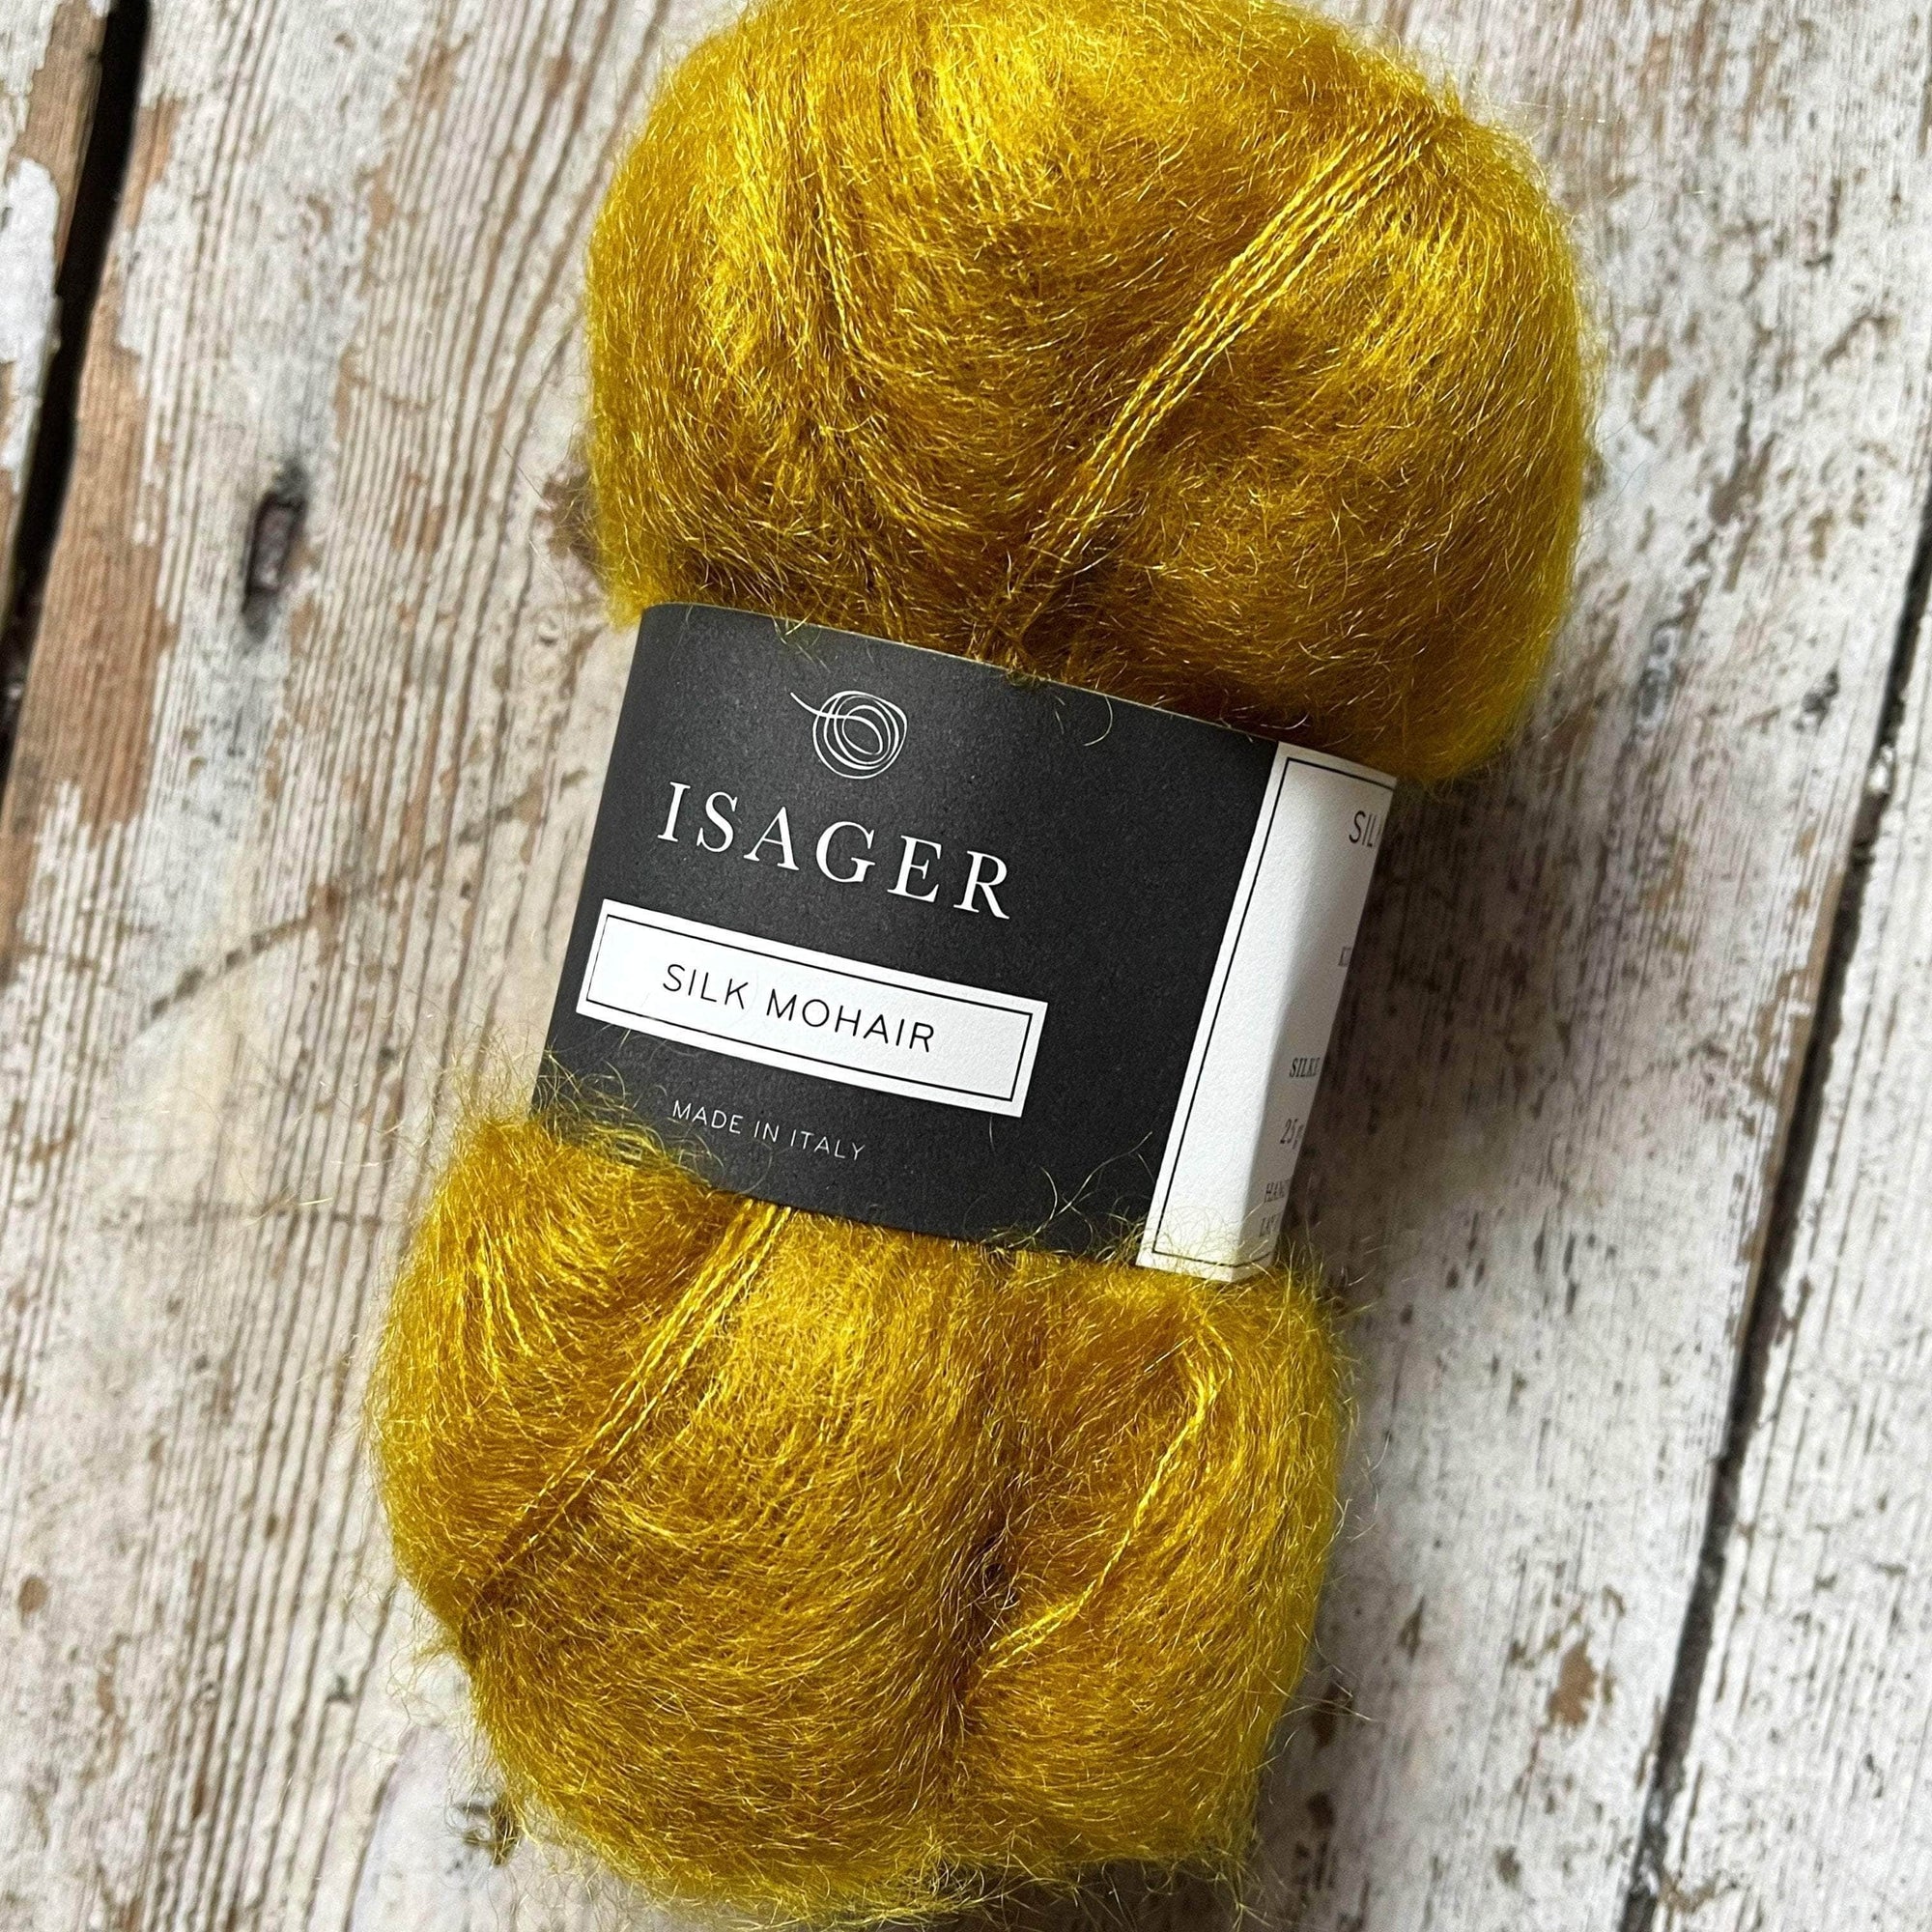 Isager Silk Mohair Isager